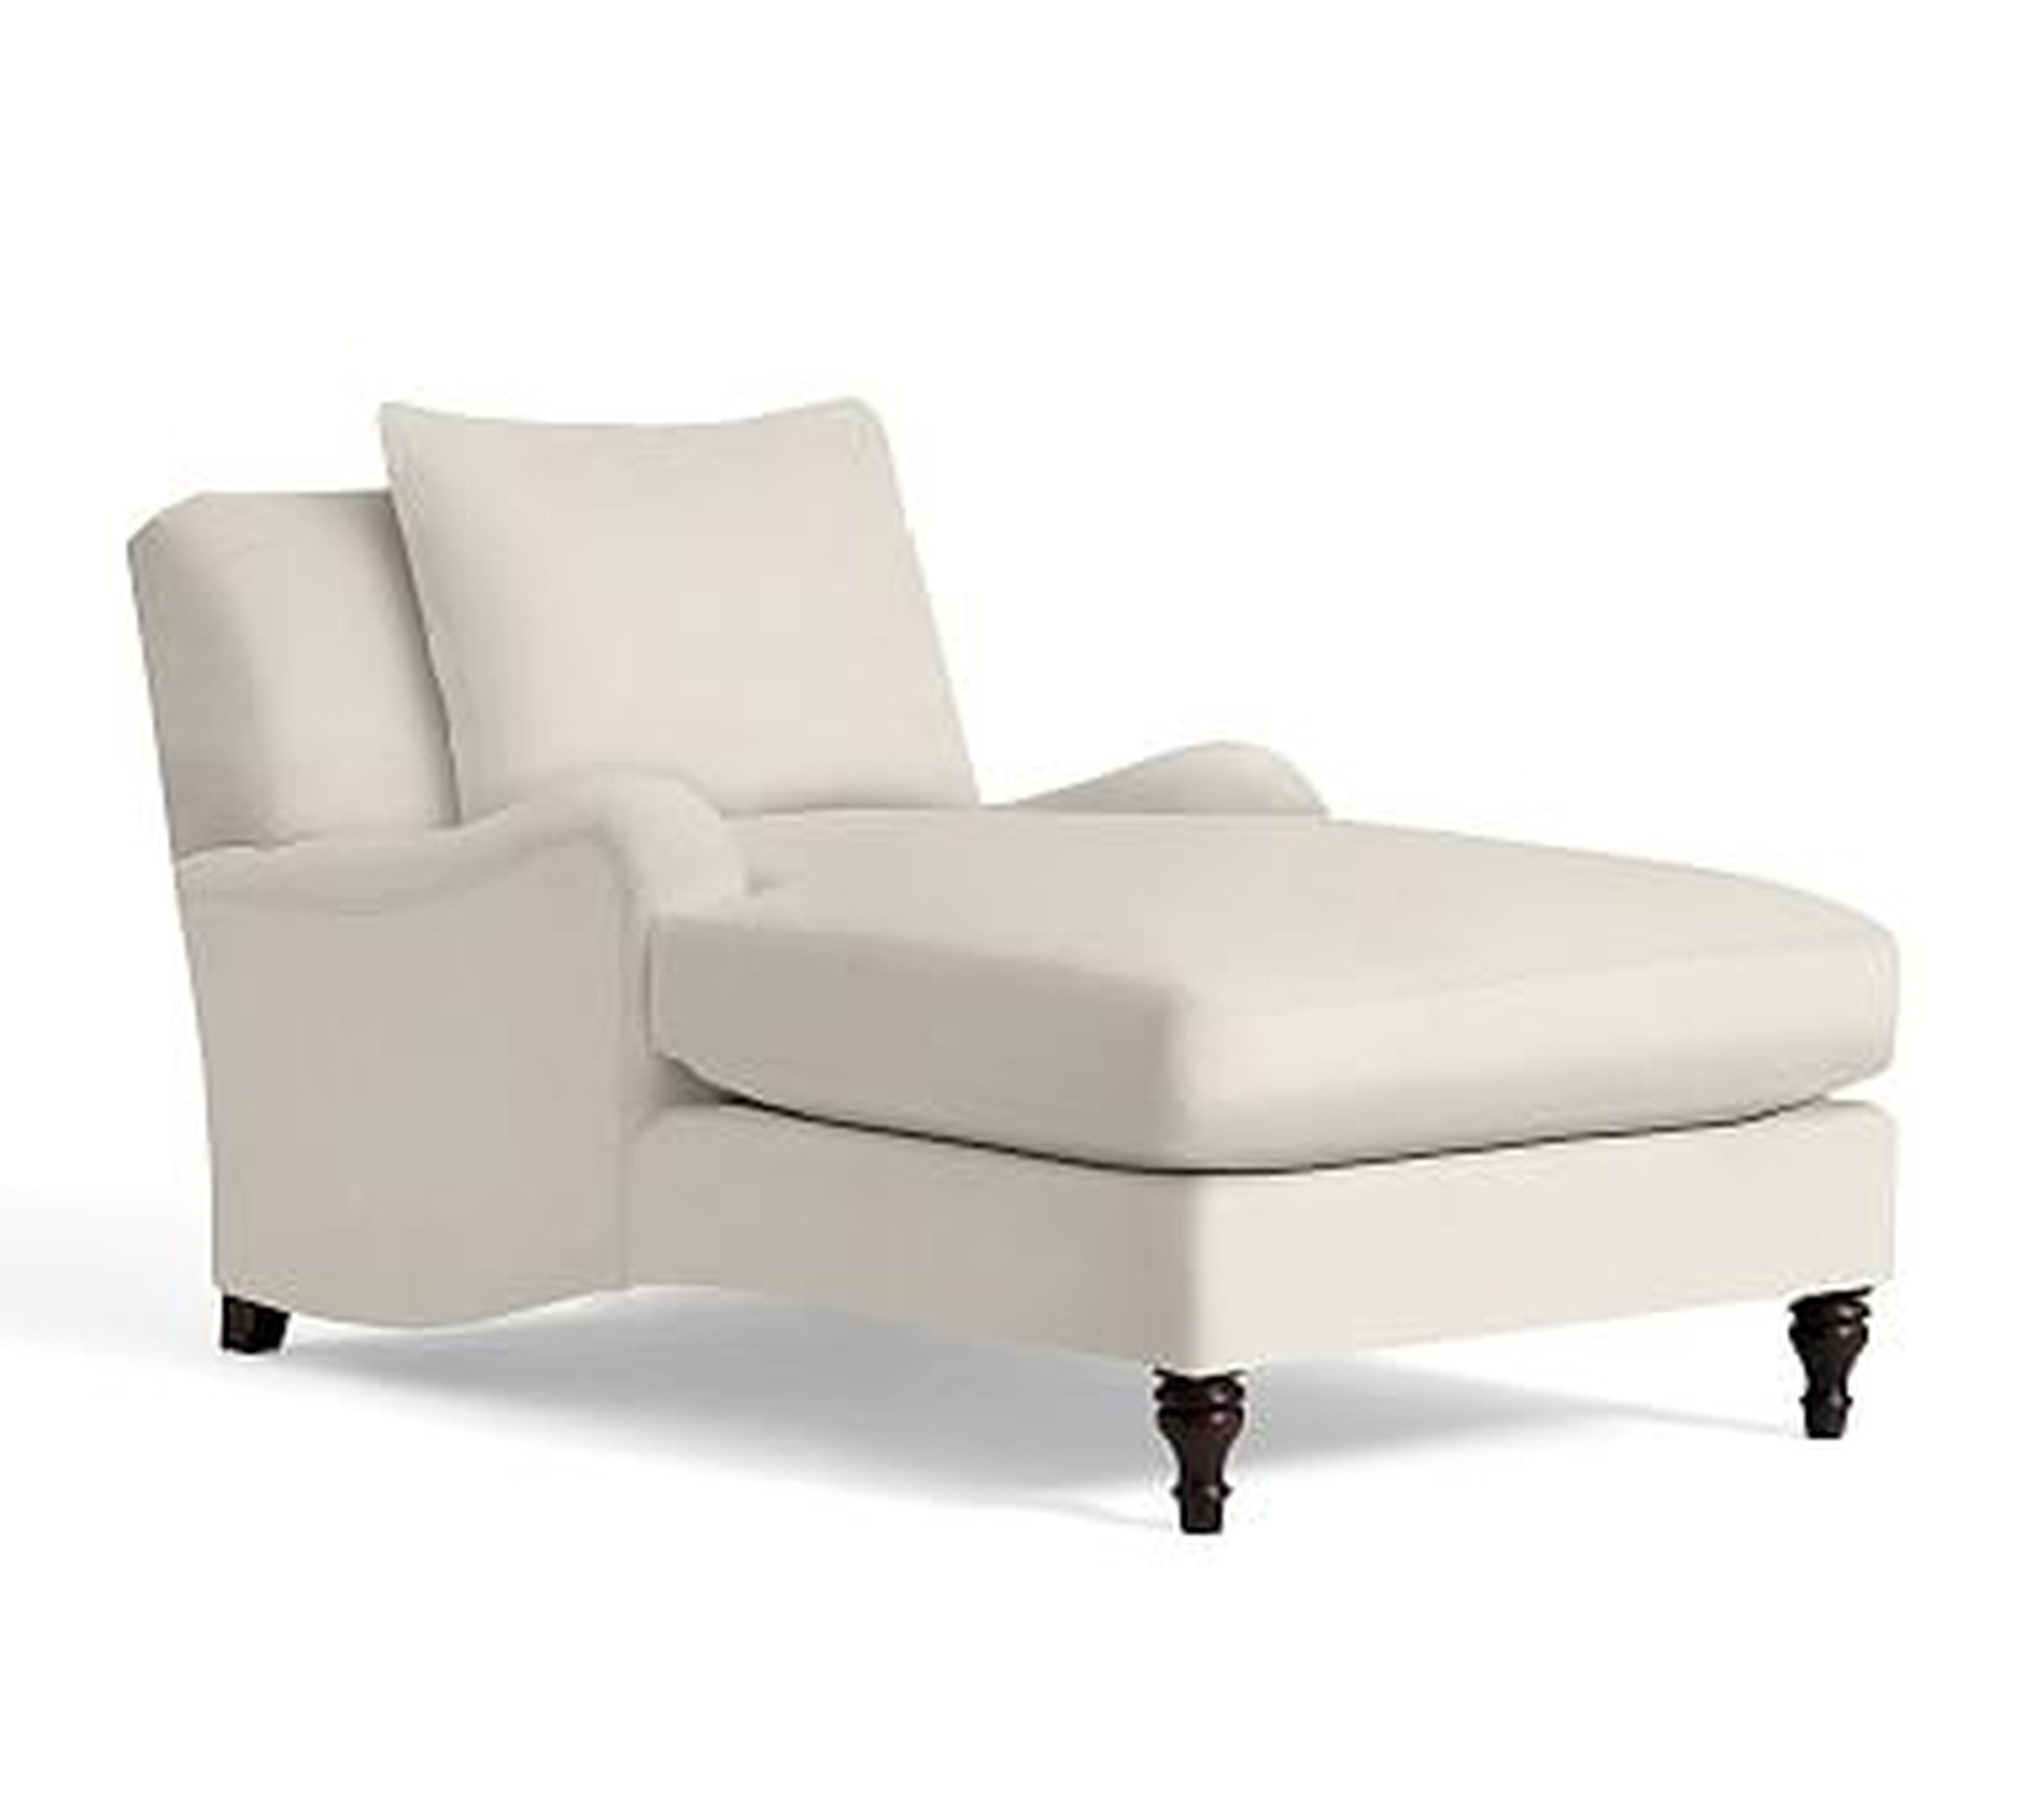 Carlisle English Arm Upholstered Chaise Lounge, Polyester Wrapped Cushions, Performance Everydaysuede(TM) Stone - Pottery Barn